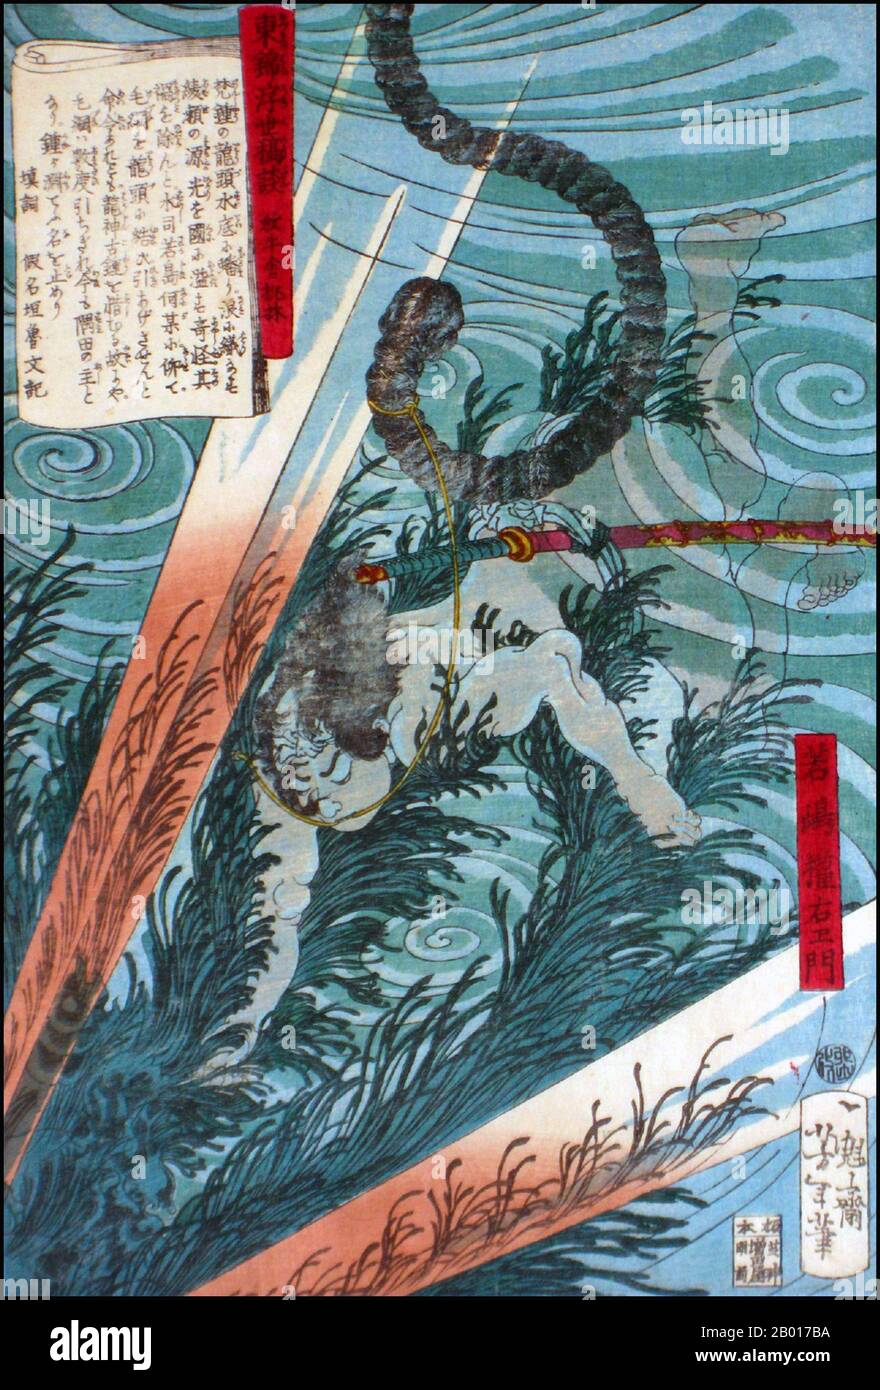 Japan: 'Wakashima Gonemon Swimming Underwater'. Ukiyo-e woodblock print by Tsukioka Yoshitoshi (1839 - 9 June 1892), c. 1867-1868.  Tsukioka Yoshitoshi, also named Taiso Yoshitoshi, was a Japanese artist. He is widely recognized as the last great master of Ukiyo-e, a type of Japanese woodblock printing. He is additionally regarded as one of the form's greatest innovators. His career spanned two eras – the last years of feudal Japan, and the first years of modern Japan following the Meiji Restoration. Stock Photo